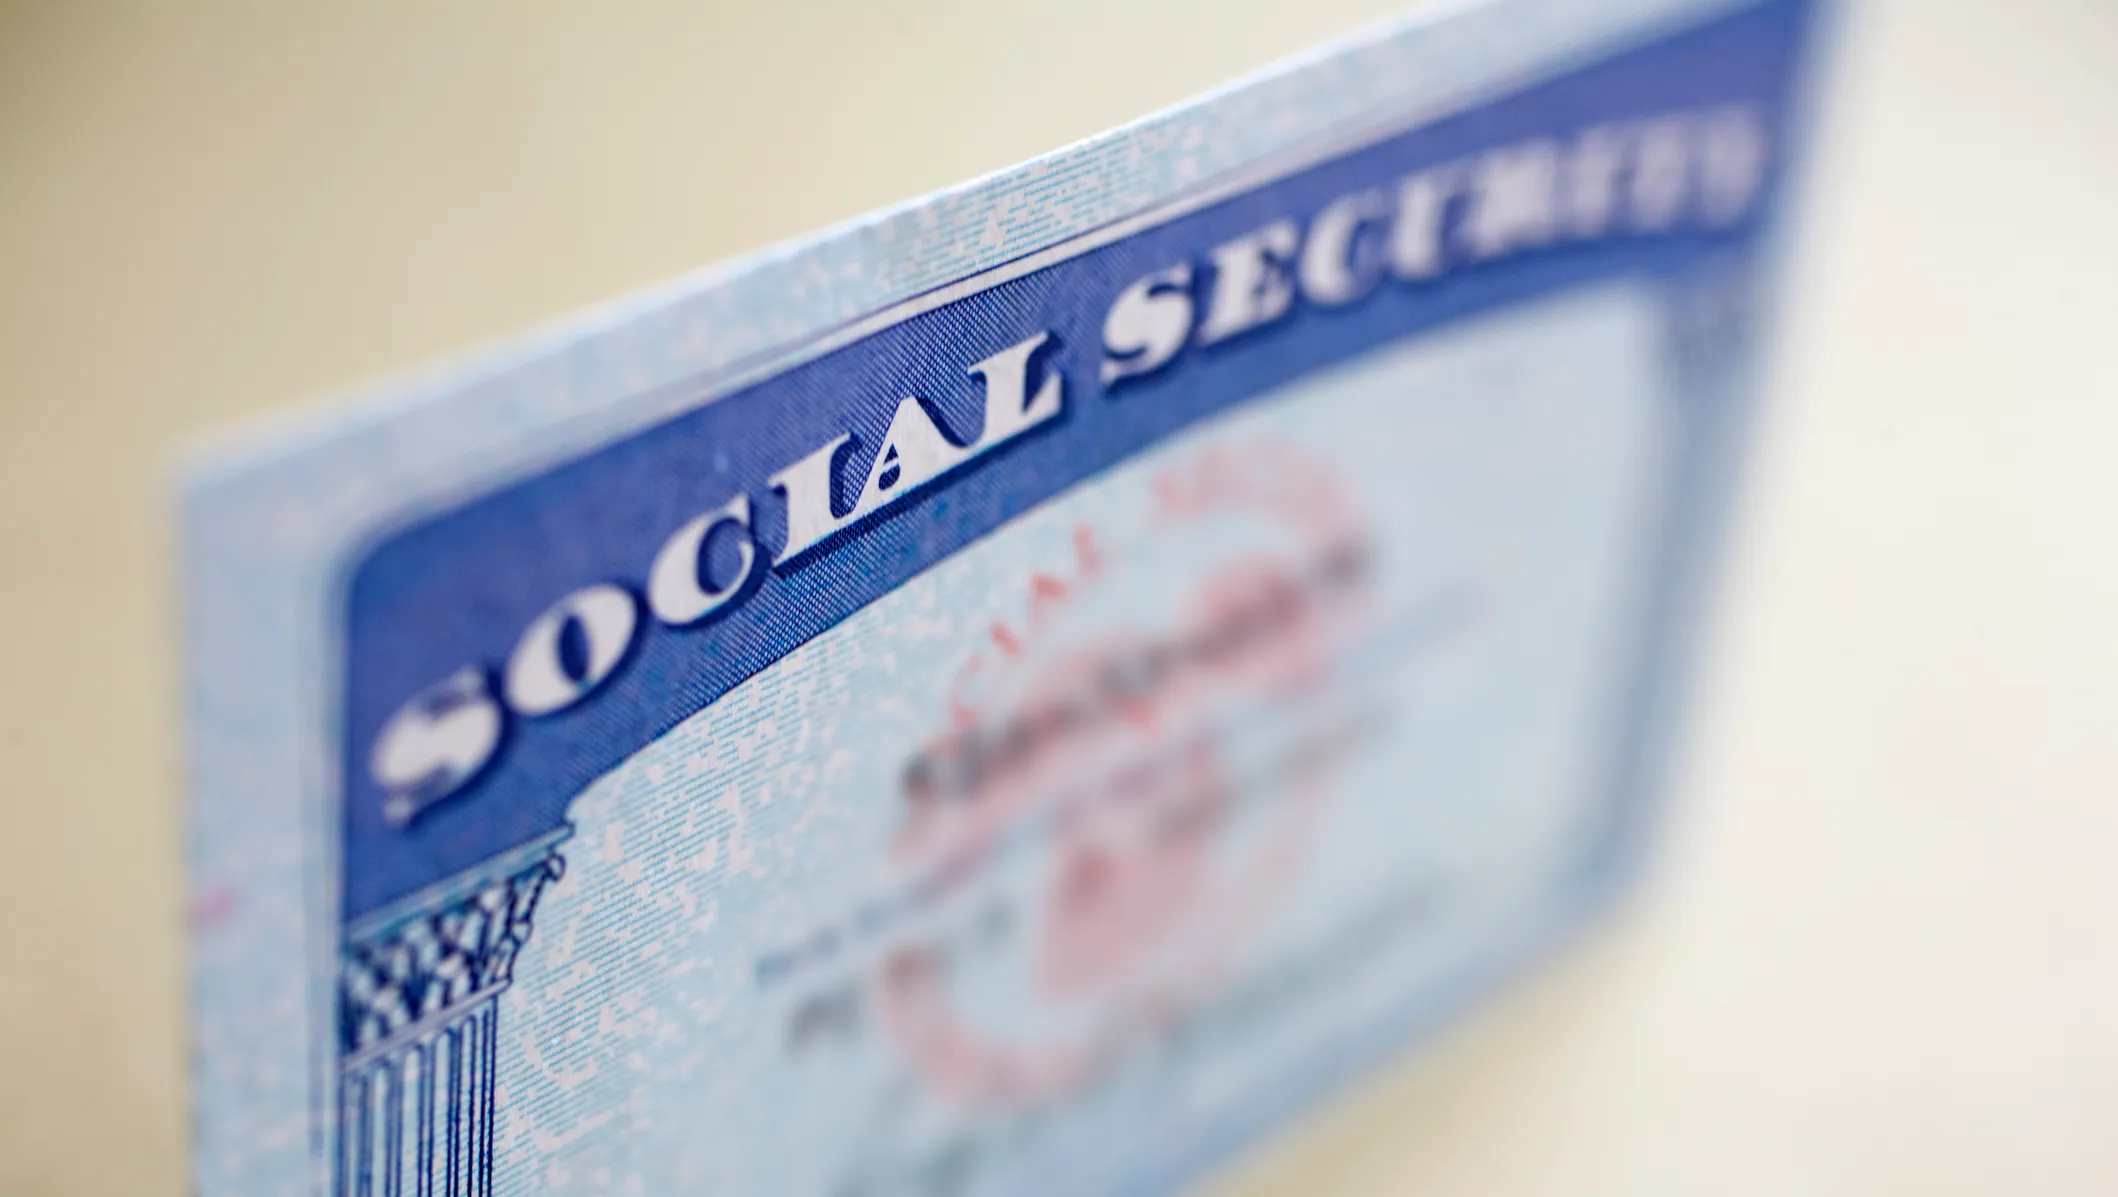 social-security-business-service-online